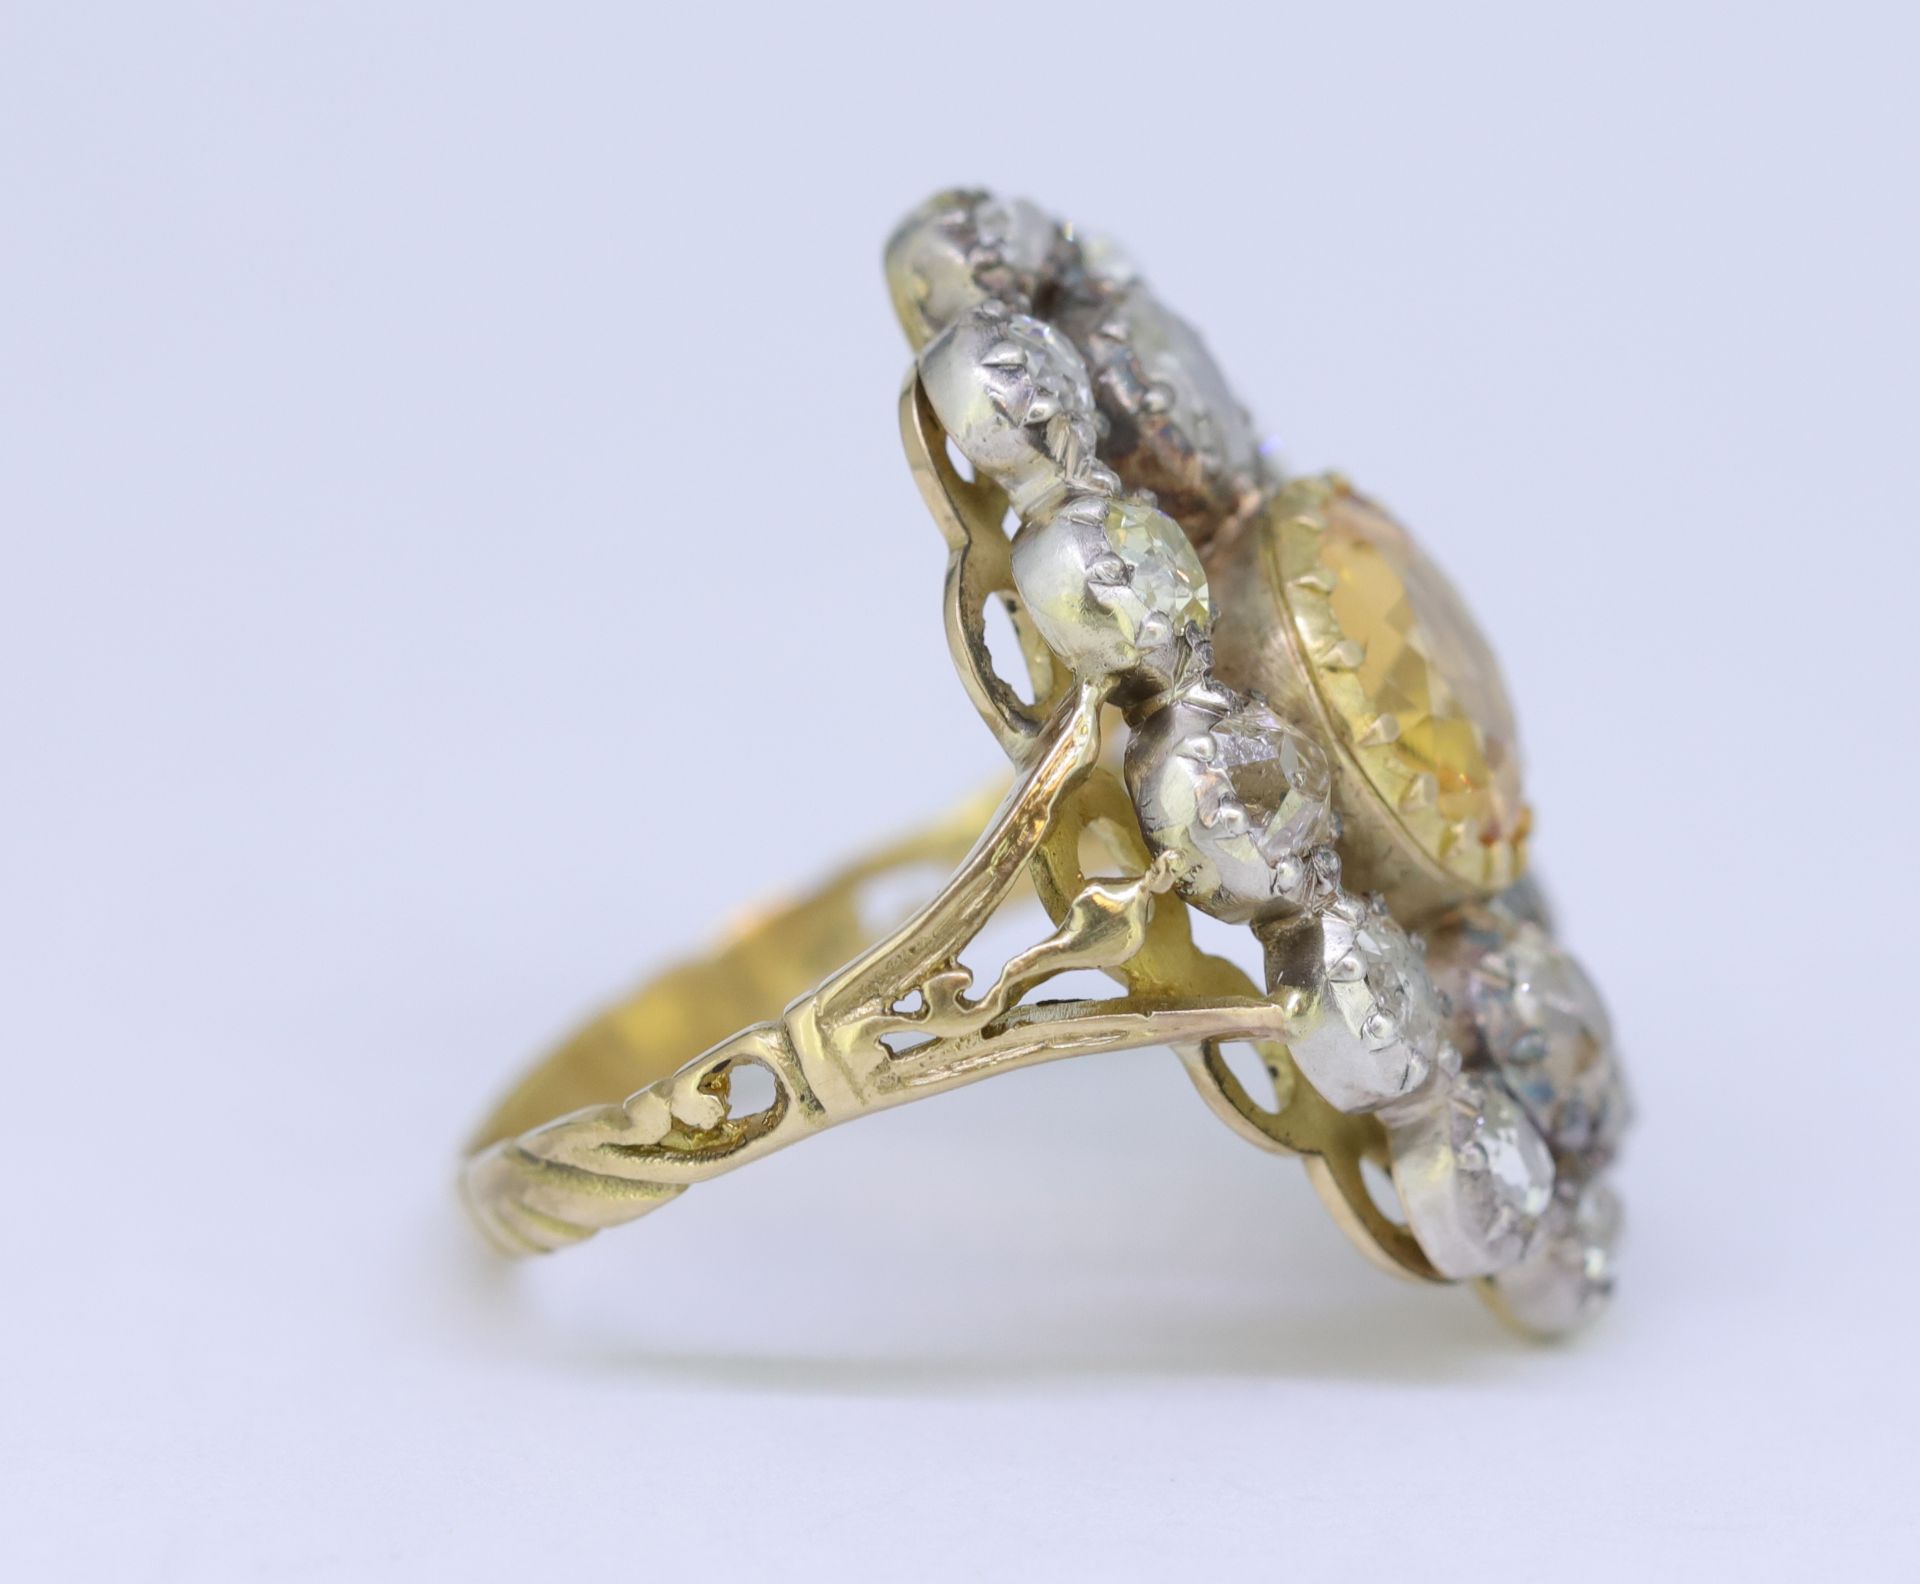 ANTIQUE TOPAZ AND DIAMOND CLUSTER RING - Image 2 of 3